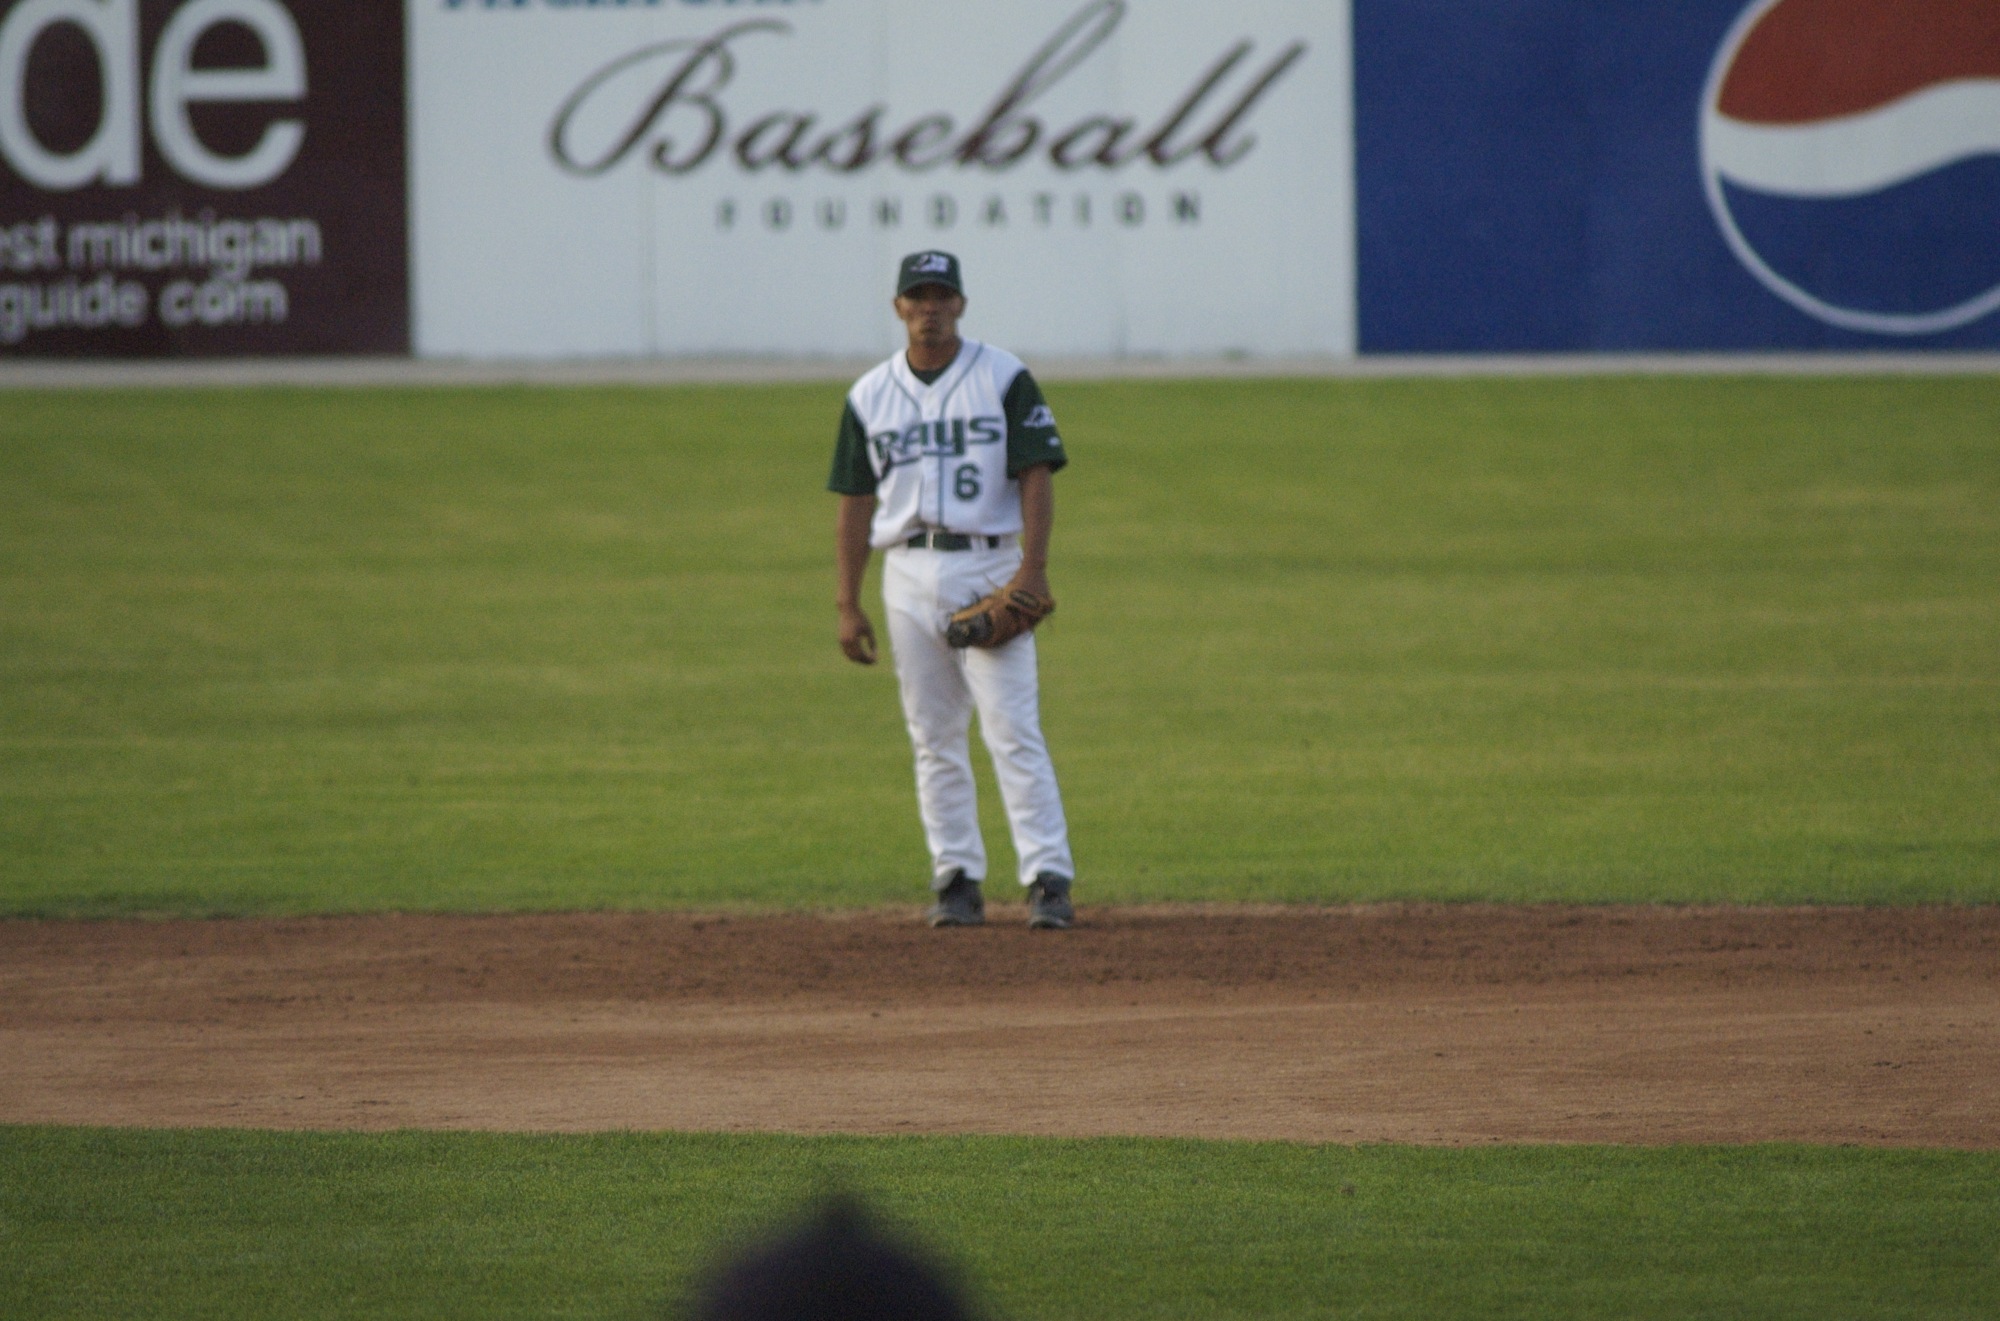 baseball player standing at the base after pitching the ball